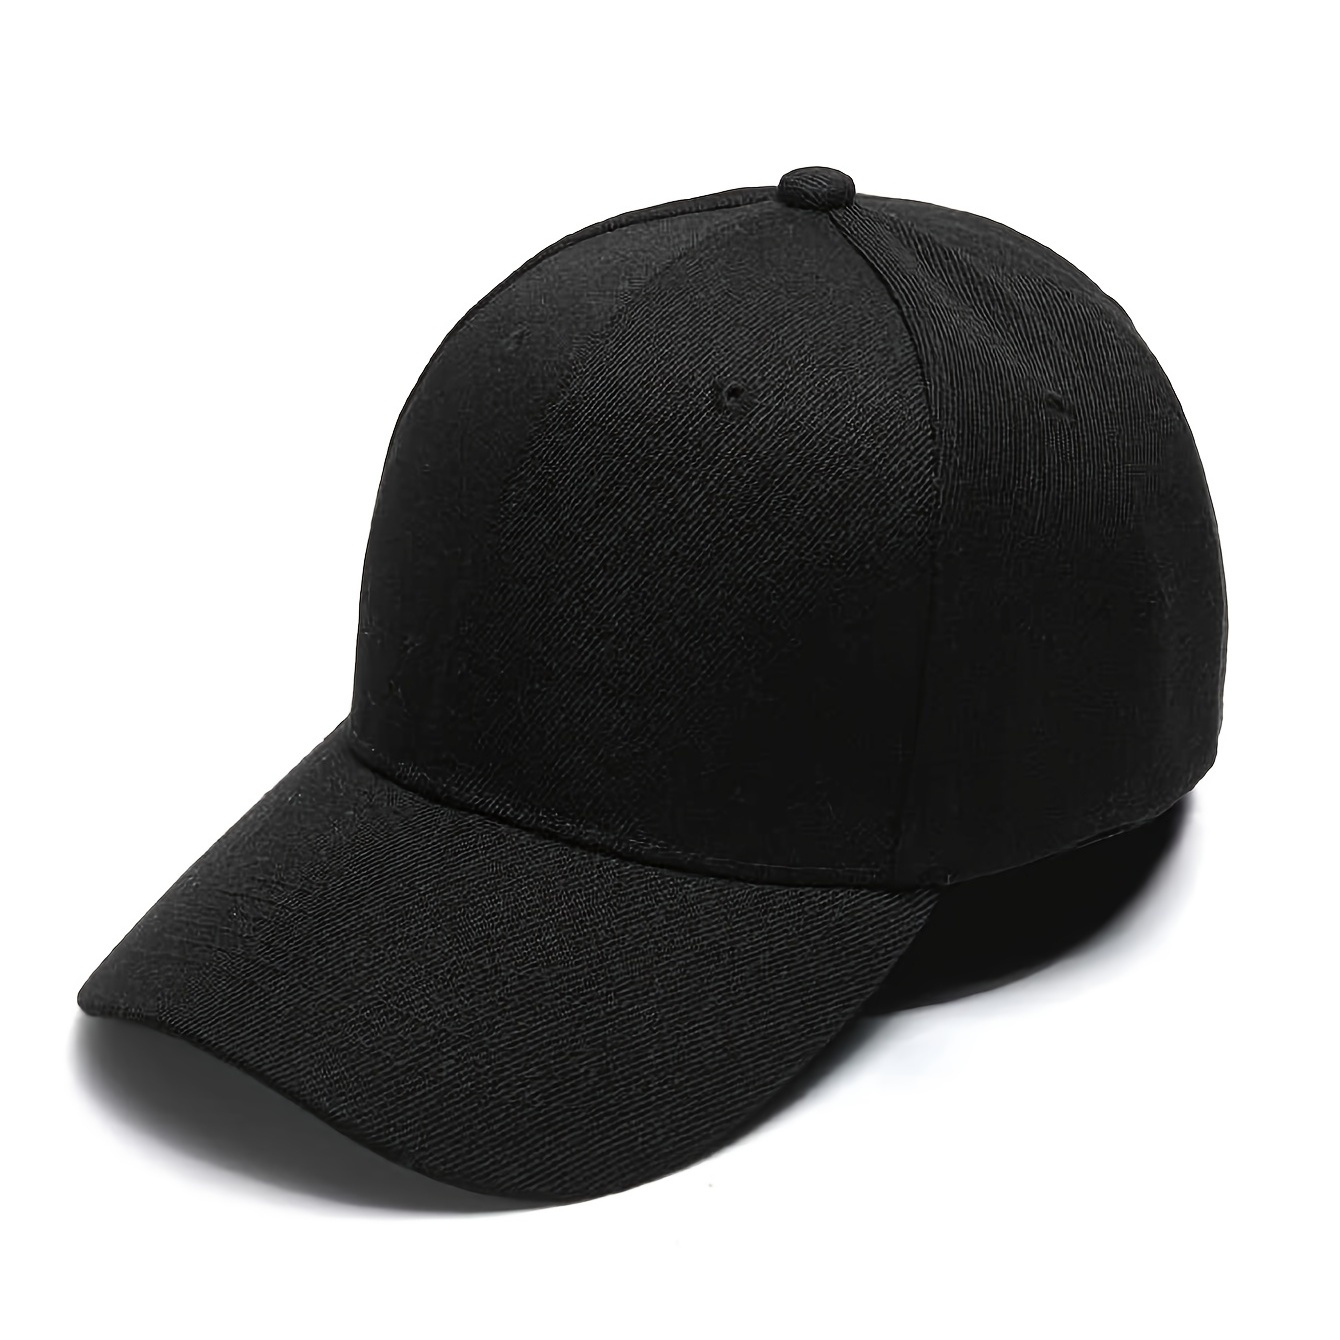 

Black Blank Baseball Cap Men Solid Color Simple Baseball Cap Sunshade Sports Outdoor, Ideal Choice For Gifts